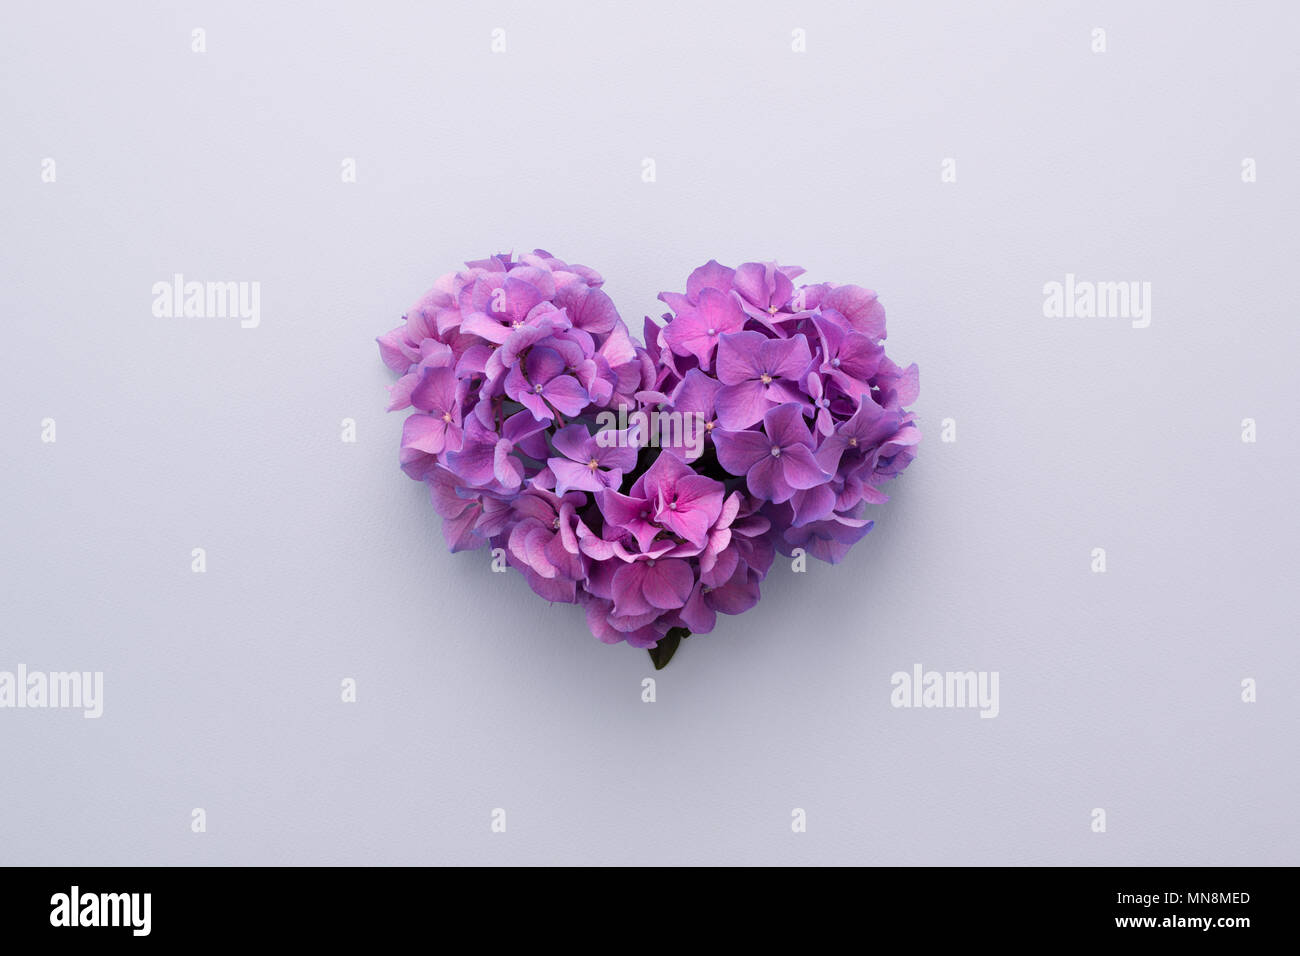 Heart shape made of purple flowers on lilac background. Gradient ultra violet colors palette. Love symbol. Top view Stock Photo